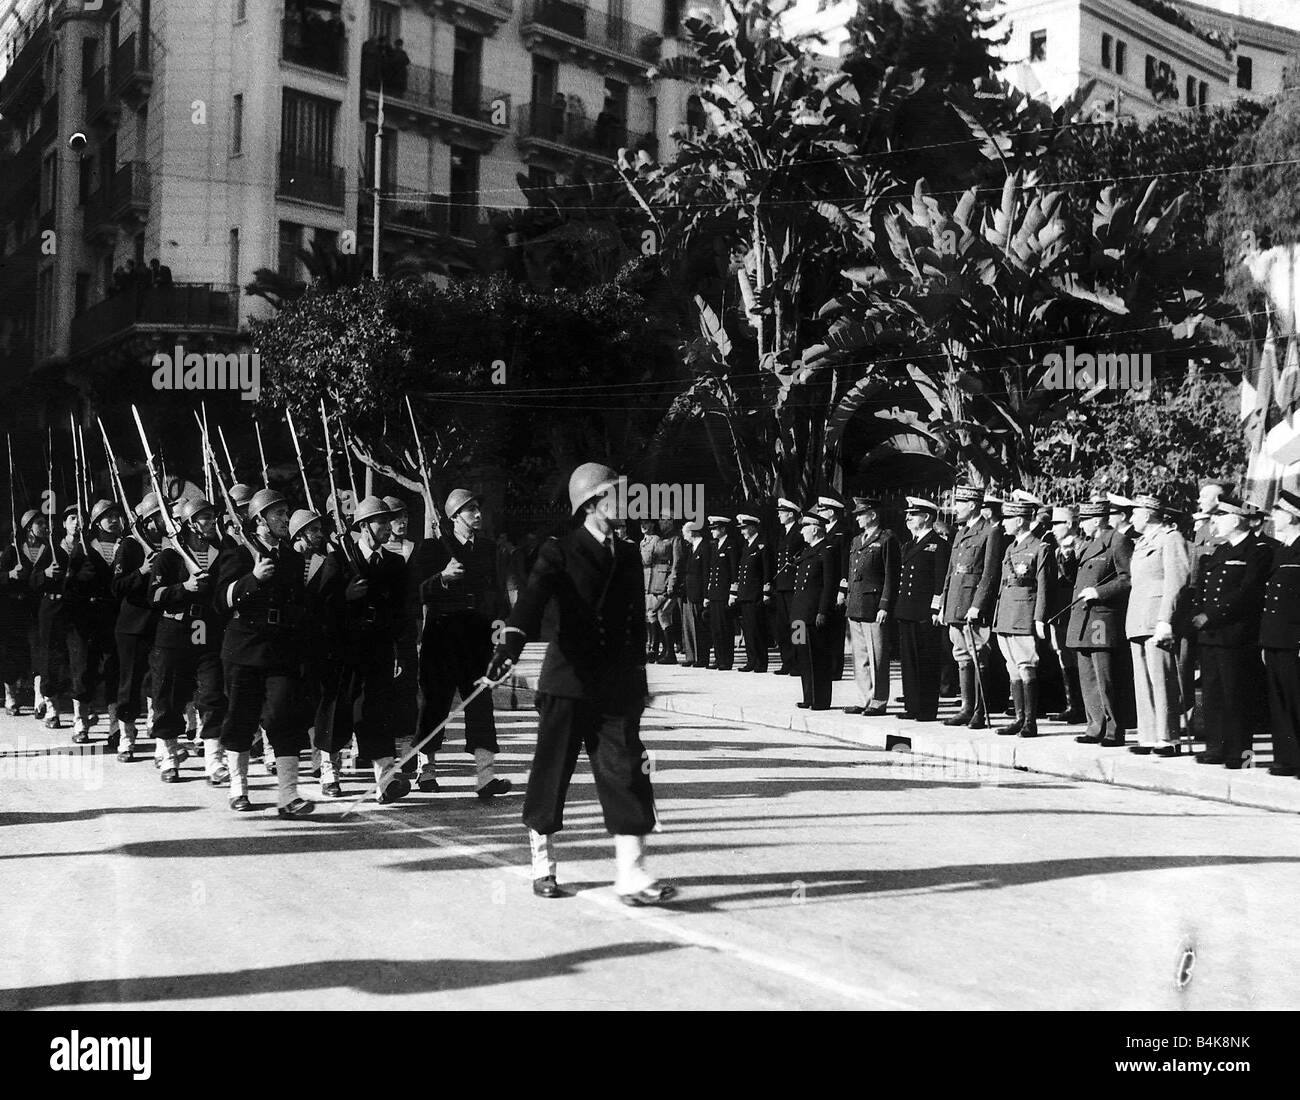 WW2 Parade in Algiers in honour of the Allied soldiers who fell in battle General Eisenhower accompanied by General Giraud Admiral Sir Andrew Cunningham Admiral Darlan review the troops during march past 1942 Stock Photo